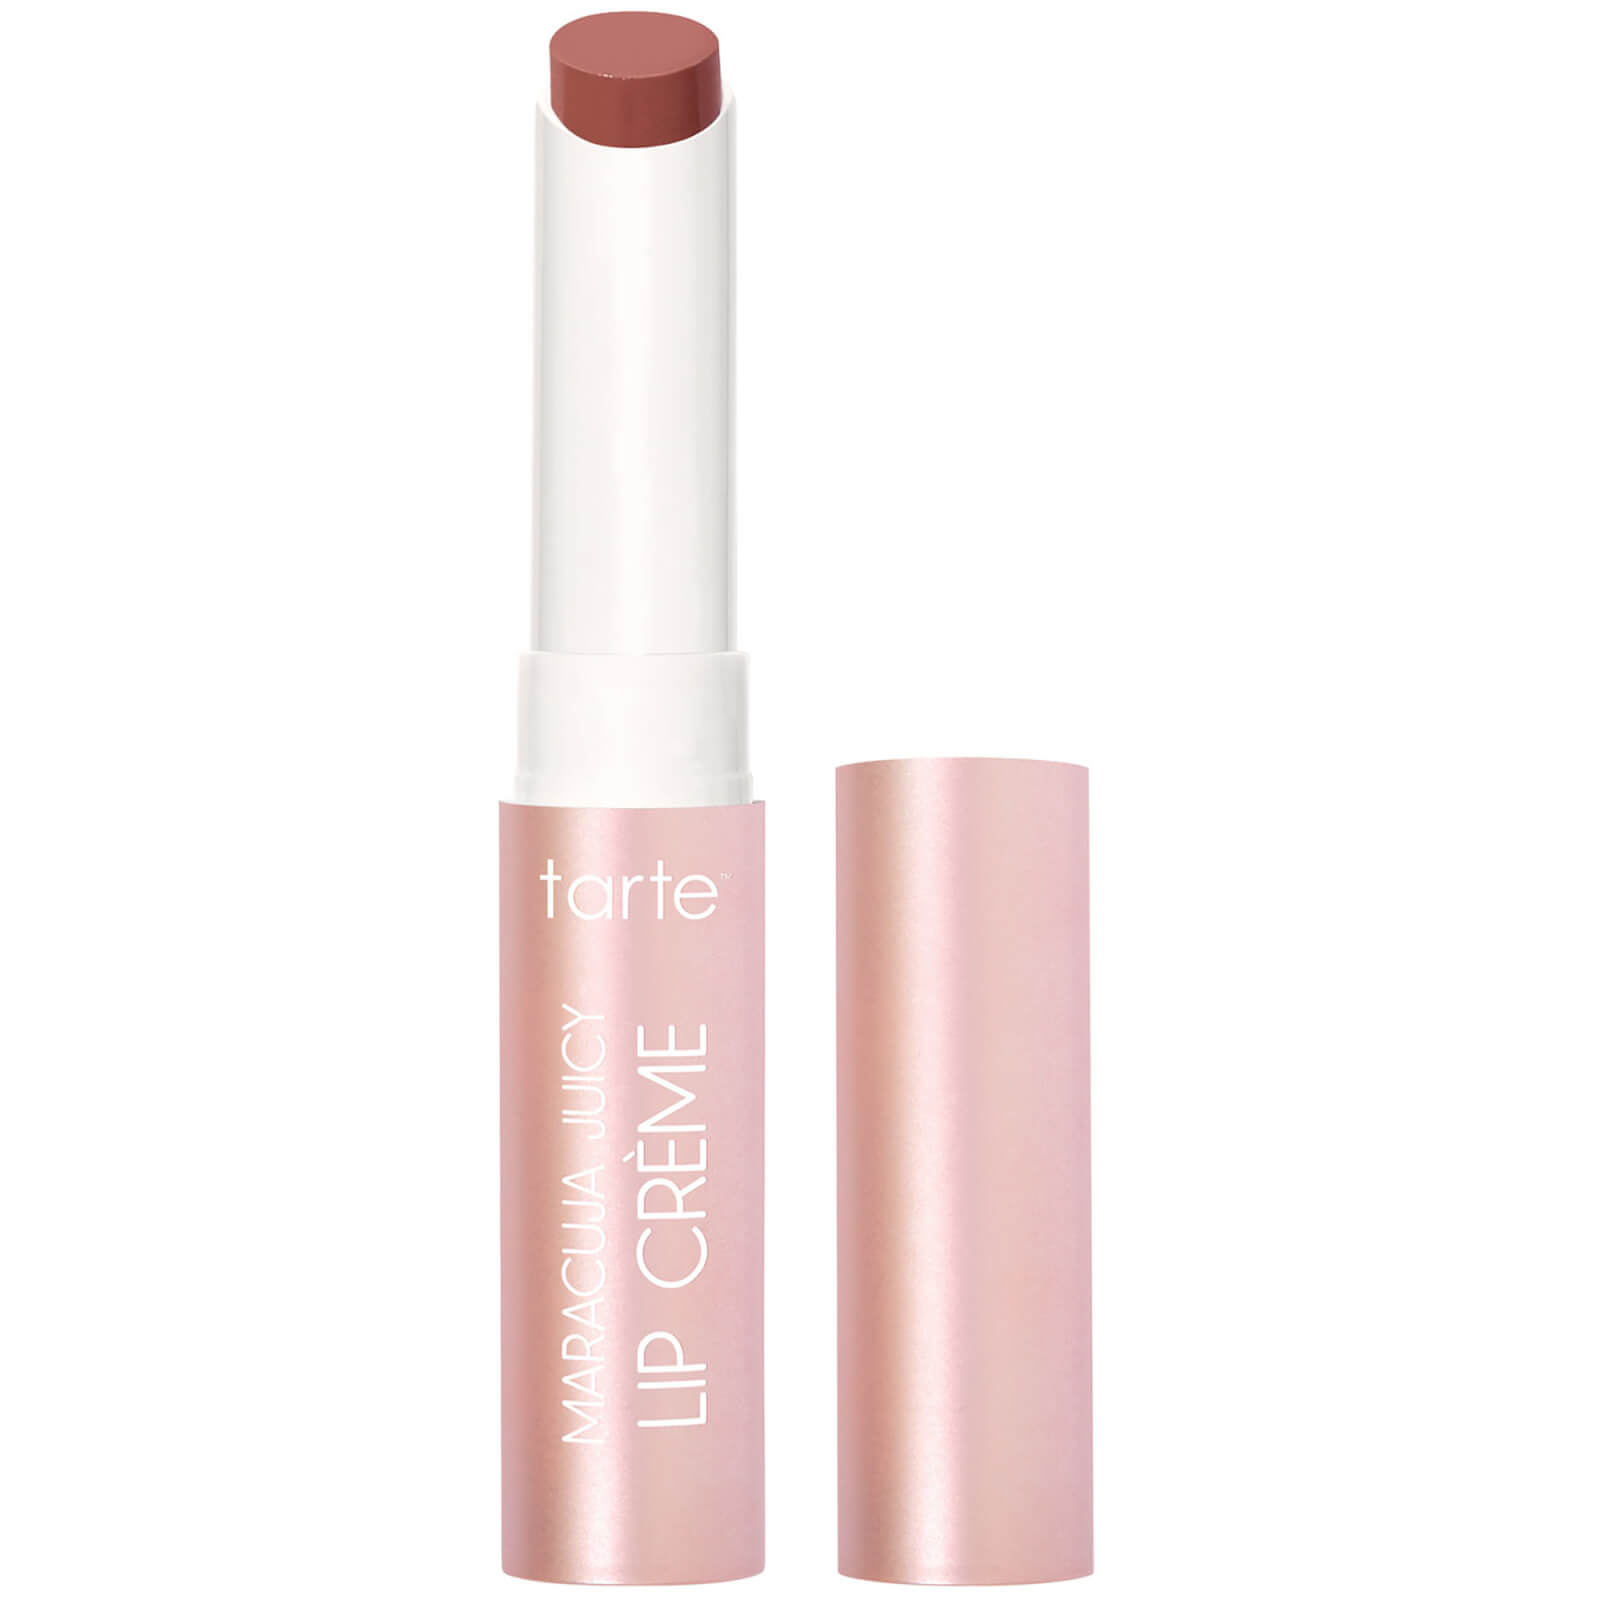 Tarte Travel-size Maracuja Juicy Lip Crème 1.3g (various Shades) In Soft Rose